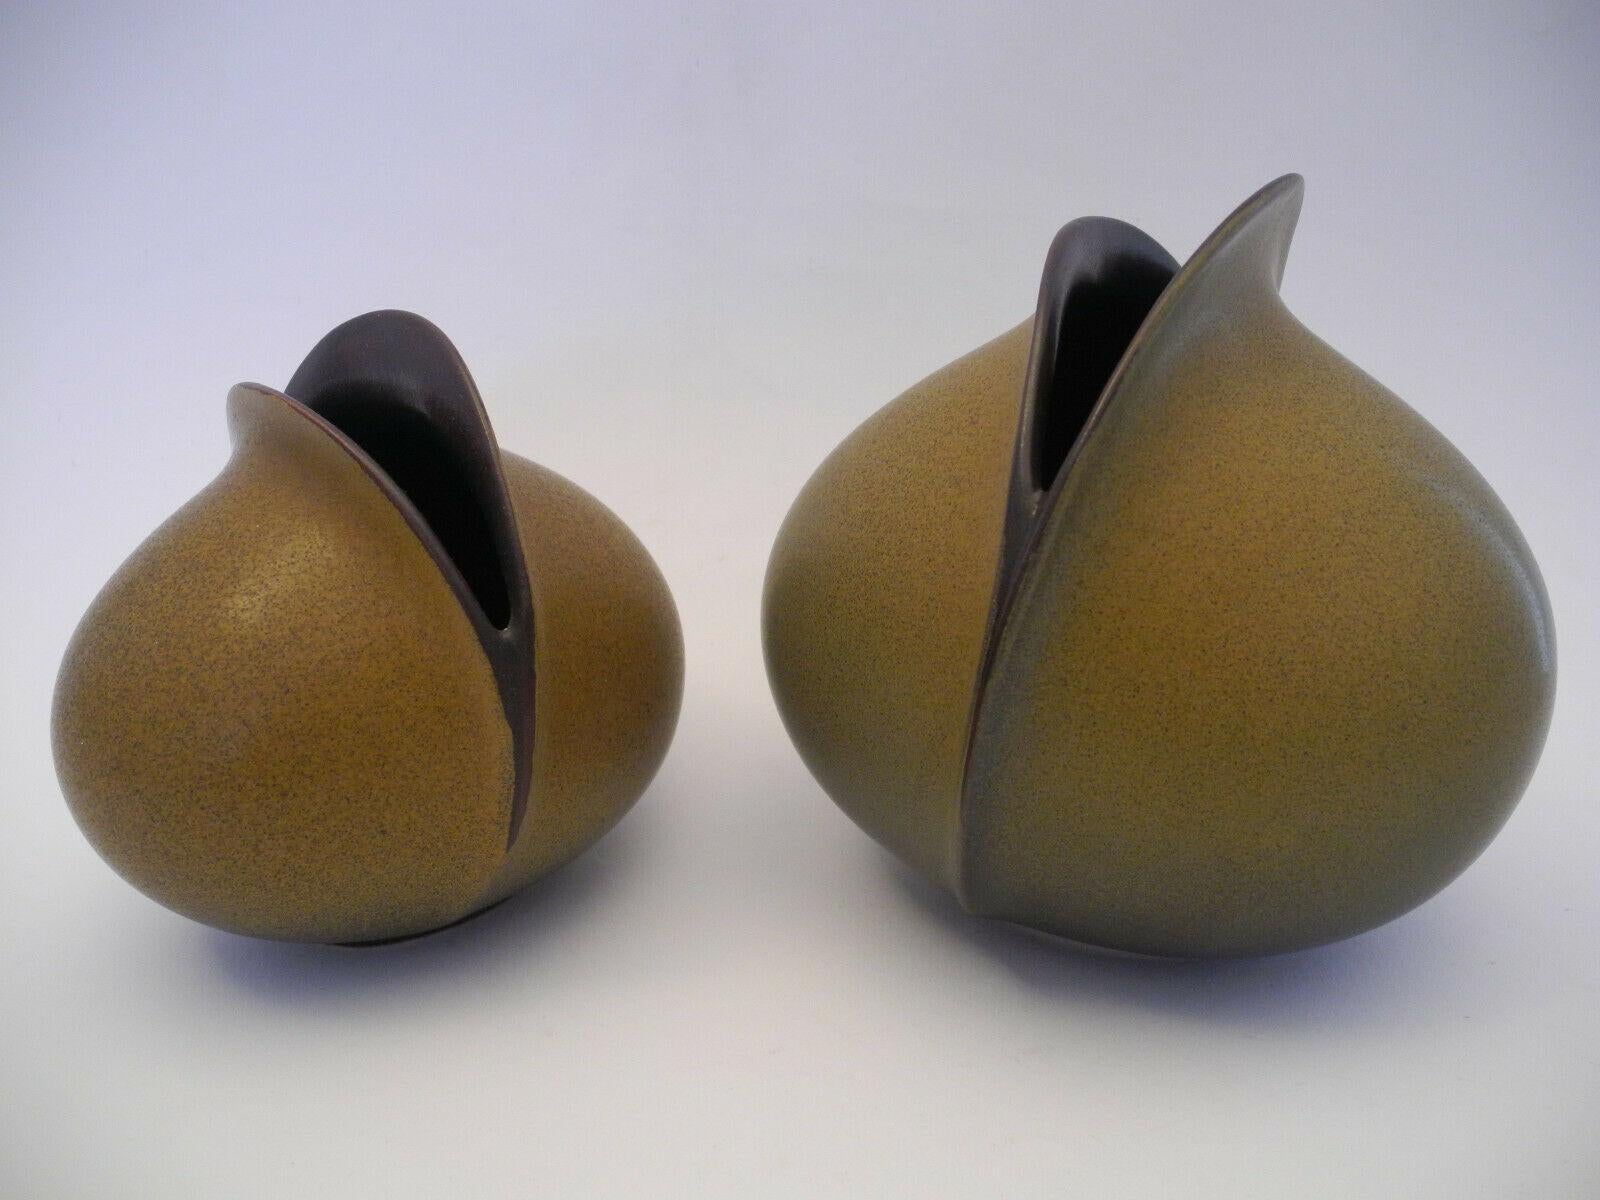 An amazing set of two midcentury studio art ceramic pottery vases made in Germany, by Uta Feyl for Rosenthal, circa 1970s. Vases are in very good condition with no chips, cracks, or flea bites. Signed with manufactory mark. The smaller Vase is